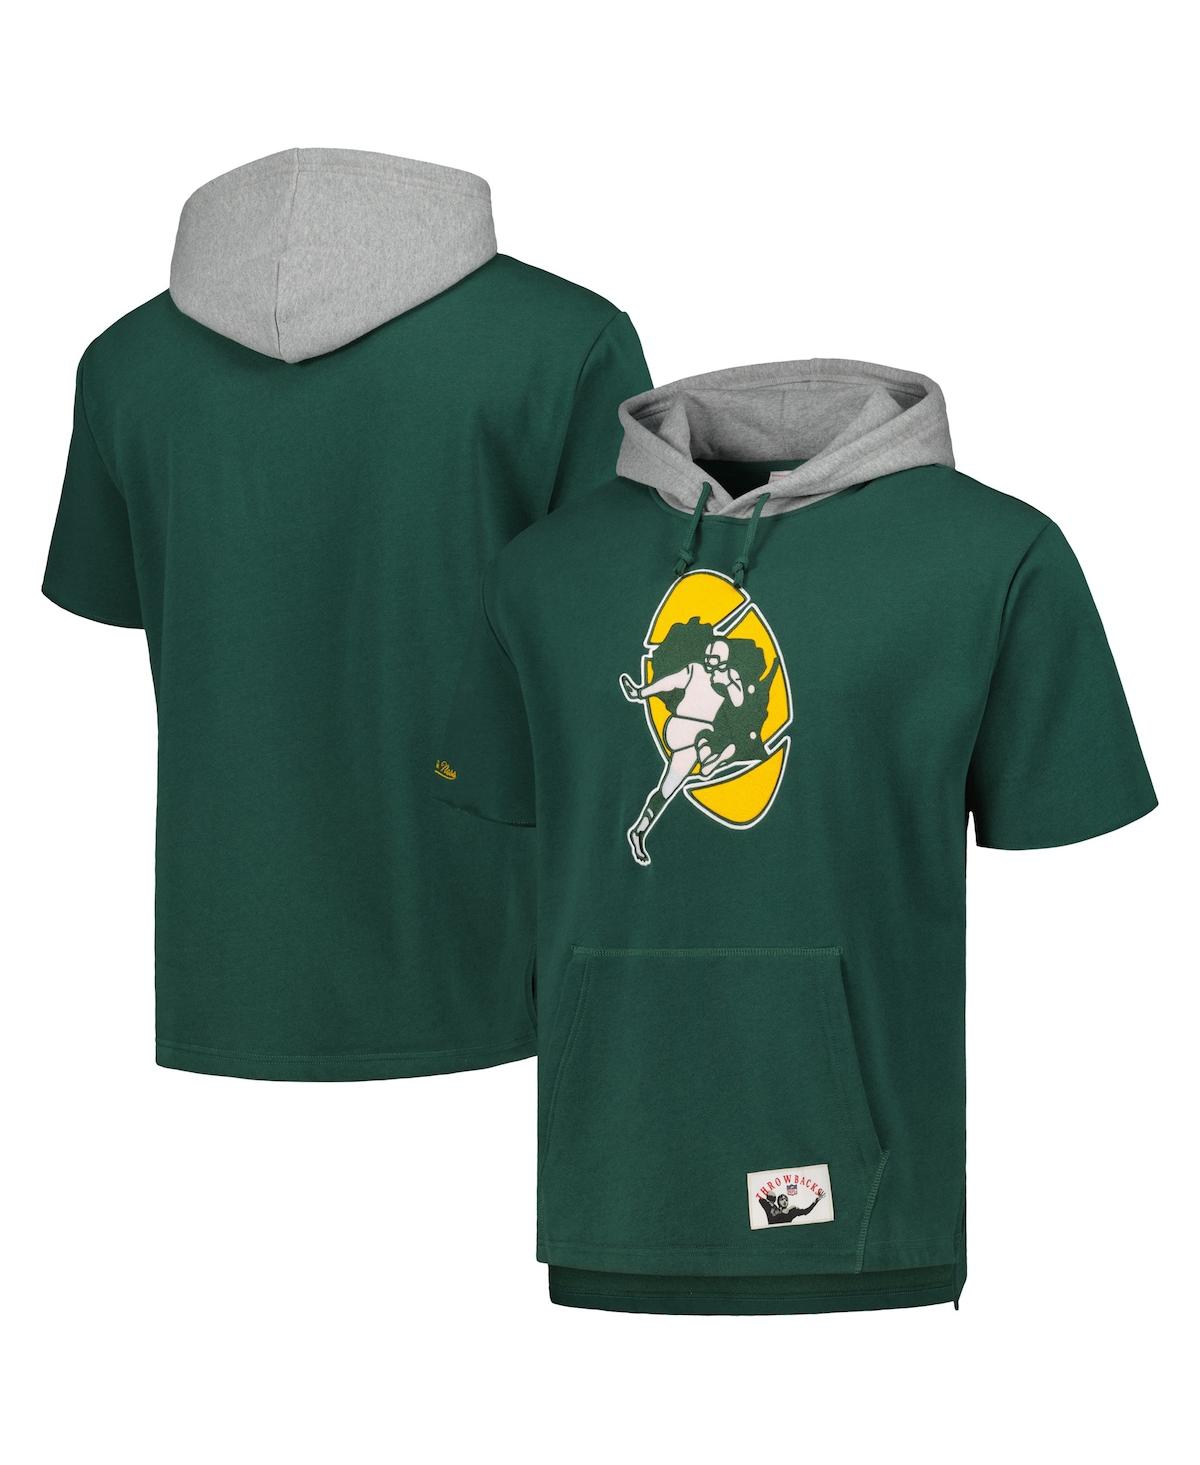 Mitchell & Ness Men's  Green Green Bay Packers Postgame Short Sleeve Hoodie